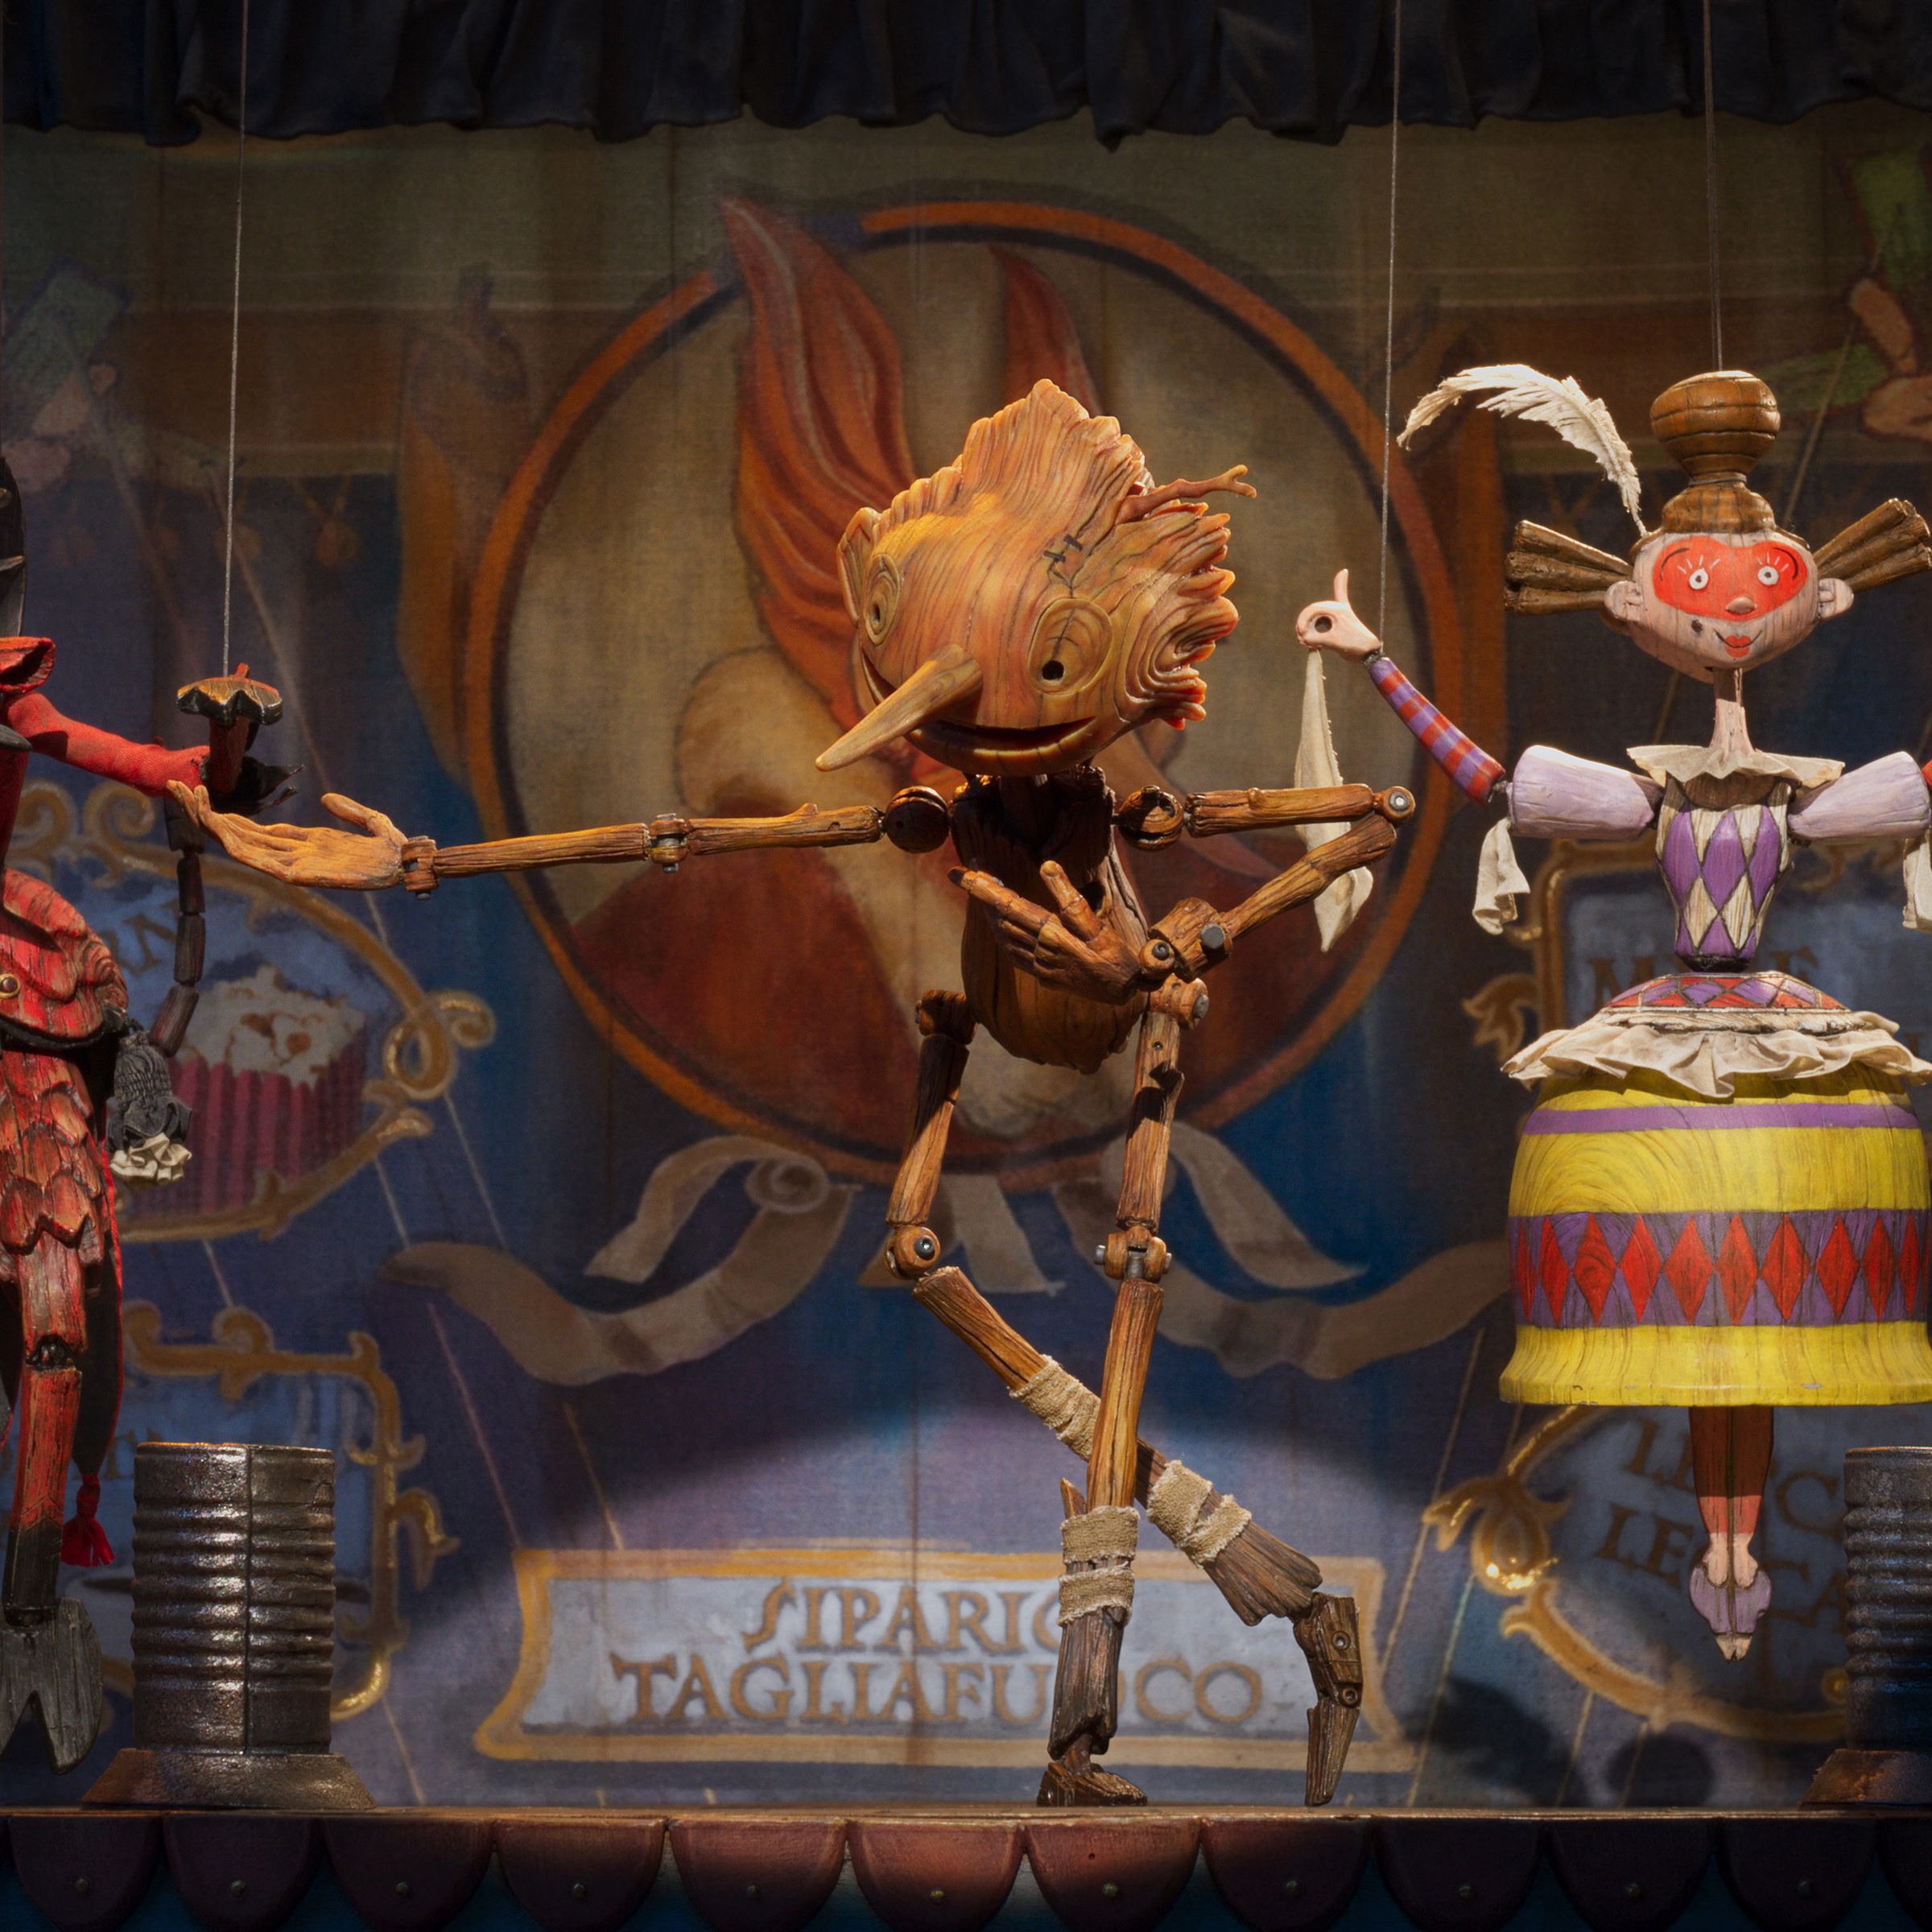 A wooden puppet shaped like a boy dancing on a small stage between a puppet made to resemble the devil and another resembling a dancer.